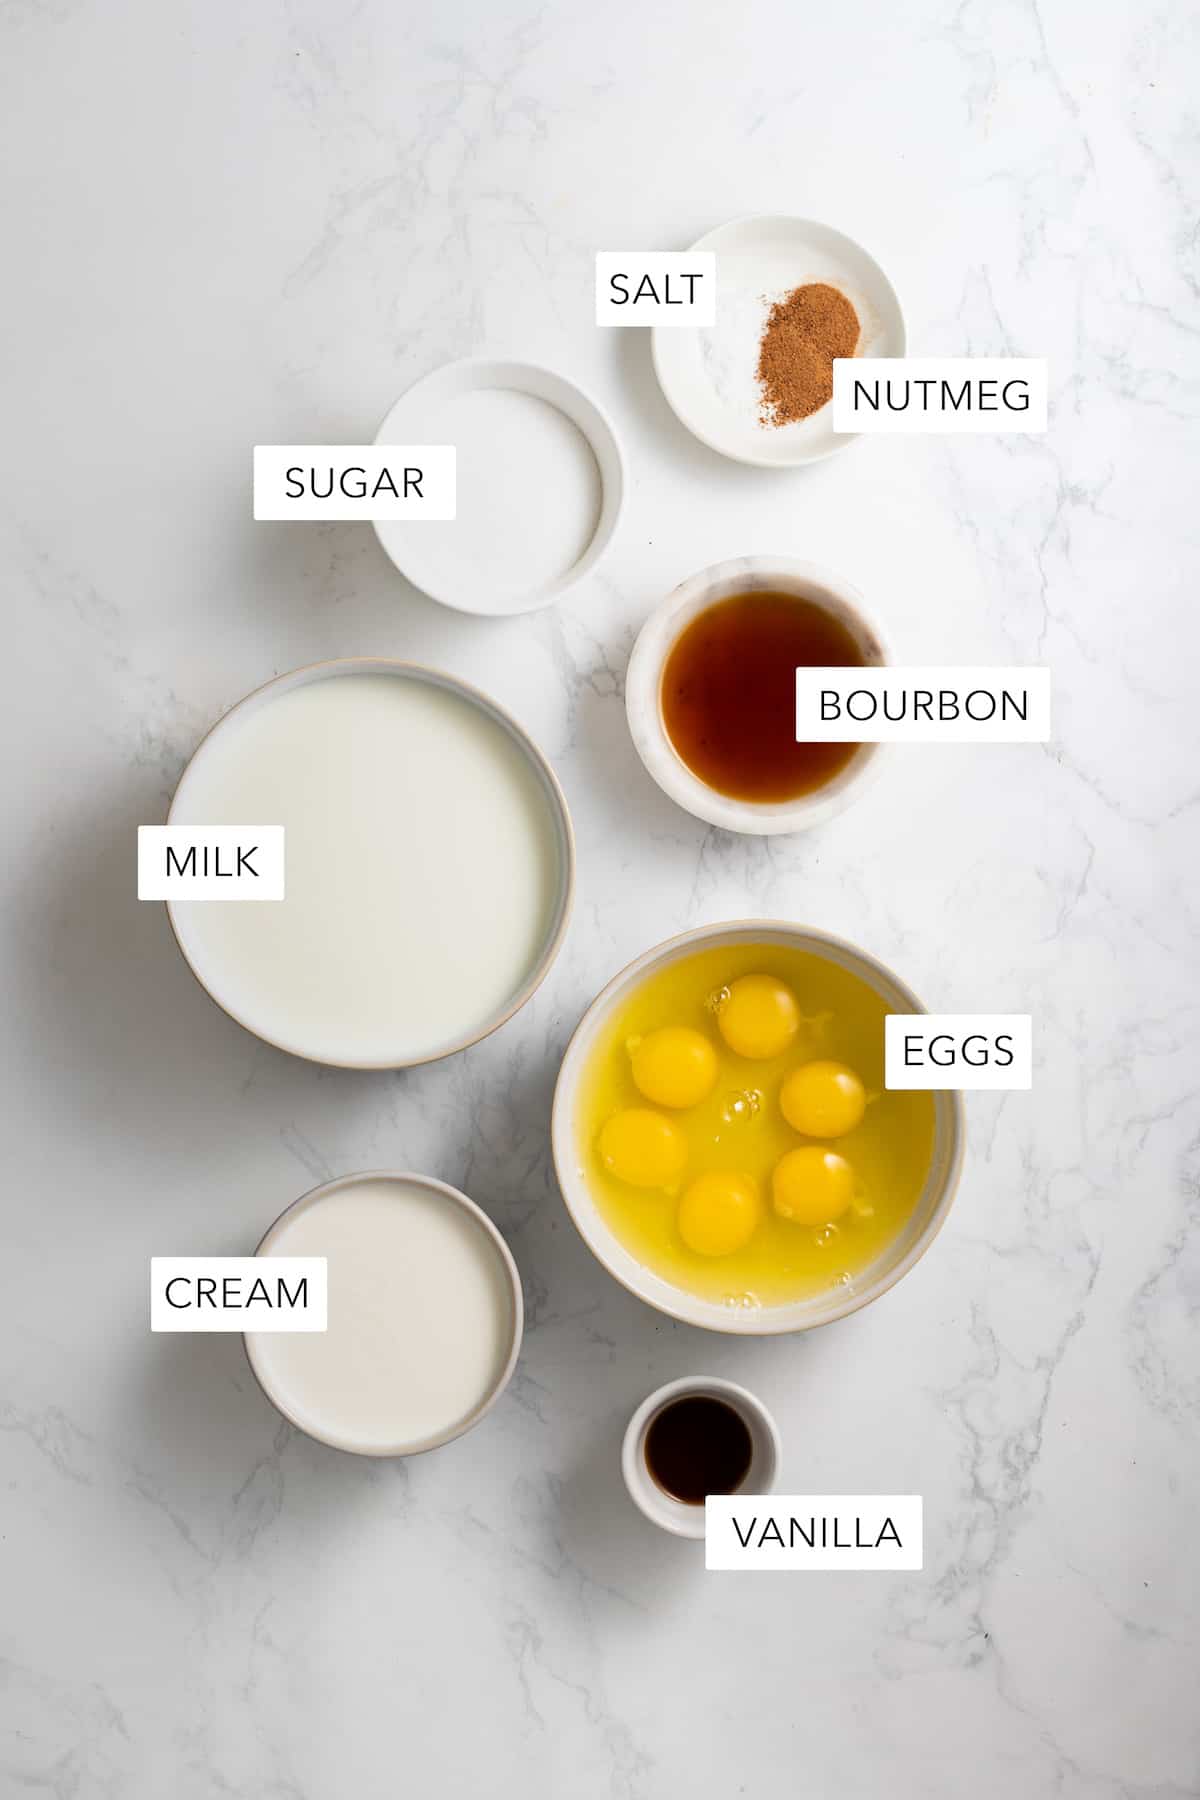 A photo of the ingredients for homemade eggnog.